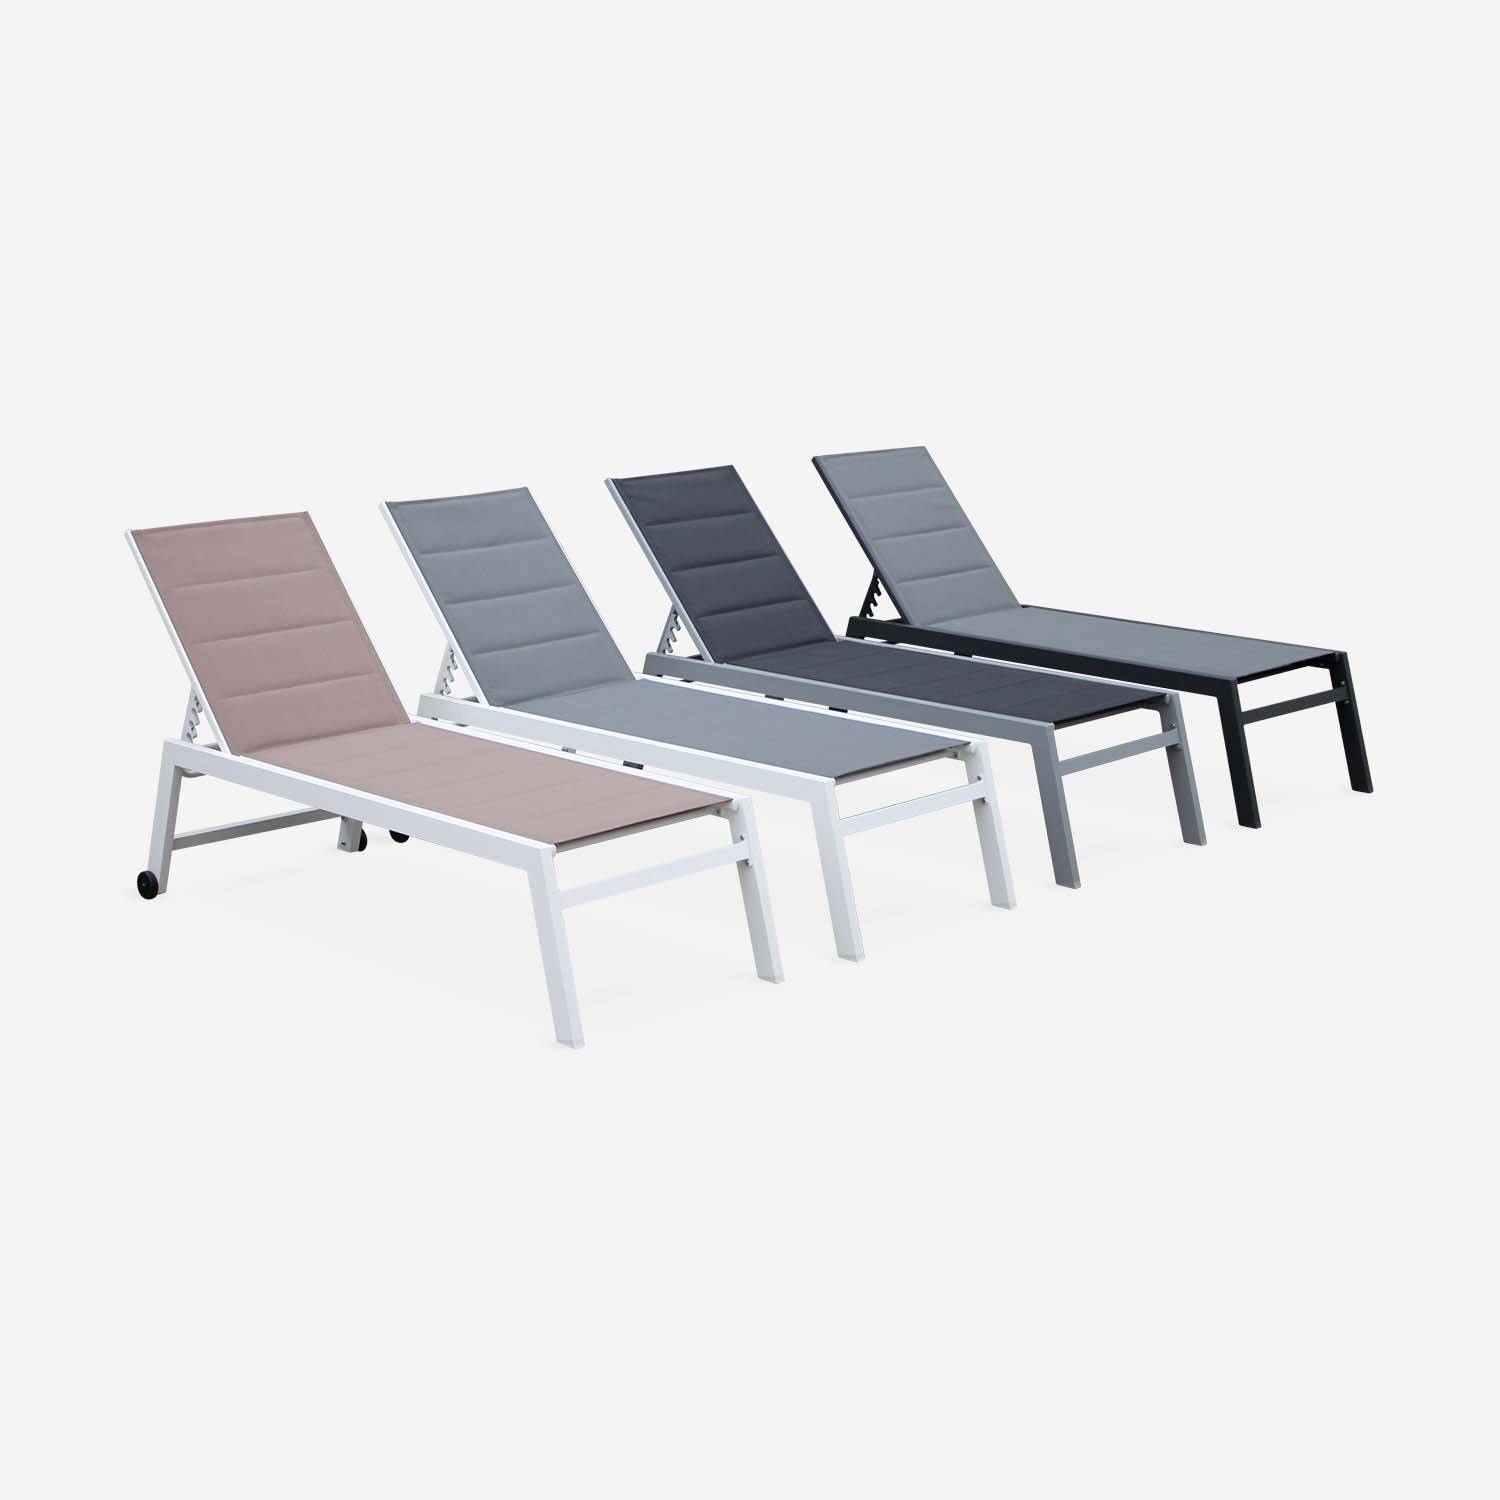 Sun lounger - Solis - Padded textilene and aluminium sun lounger with 6 positions, white frame, taupe textilene Photo6